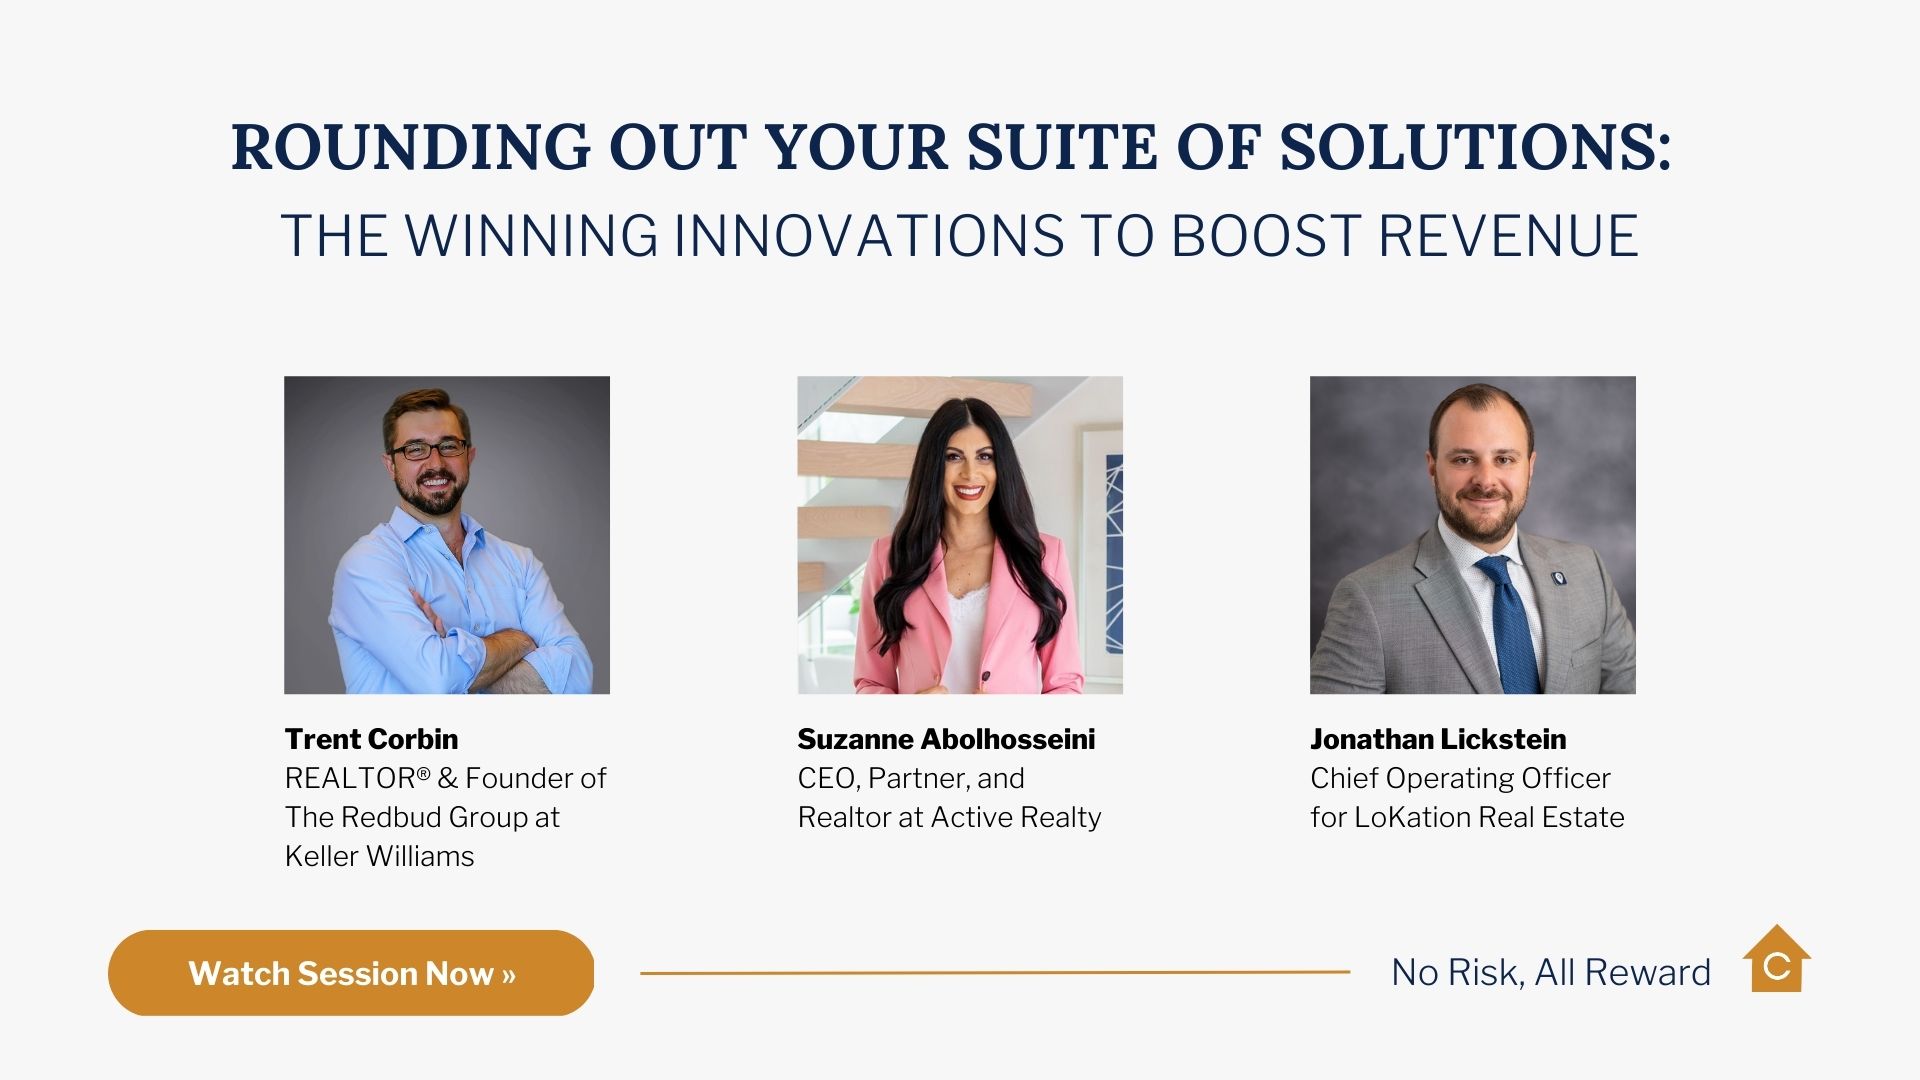 Rounding Out Your Suite of Solutions: The Winning Innovations to Boost Revenue